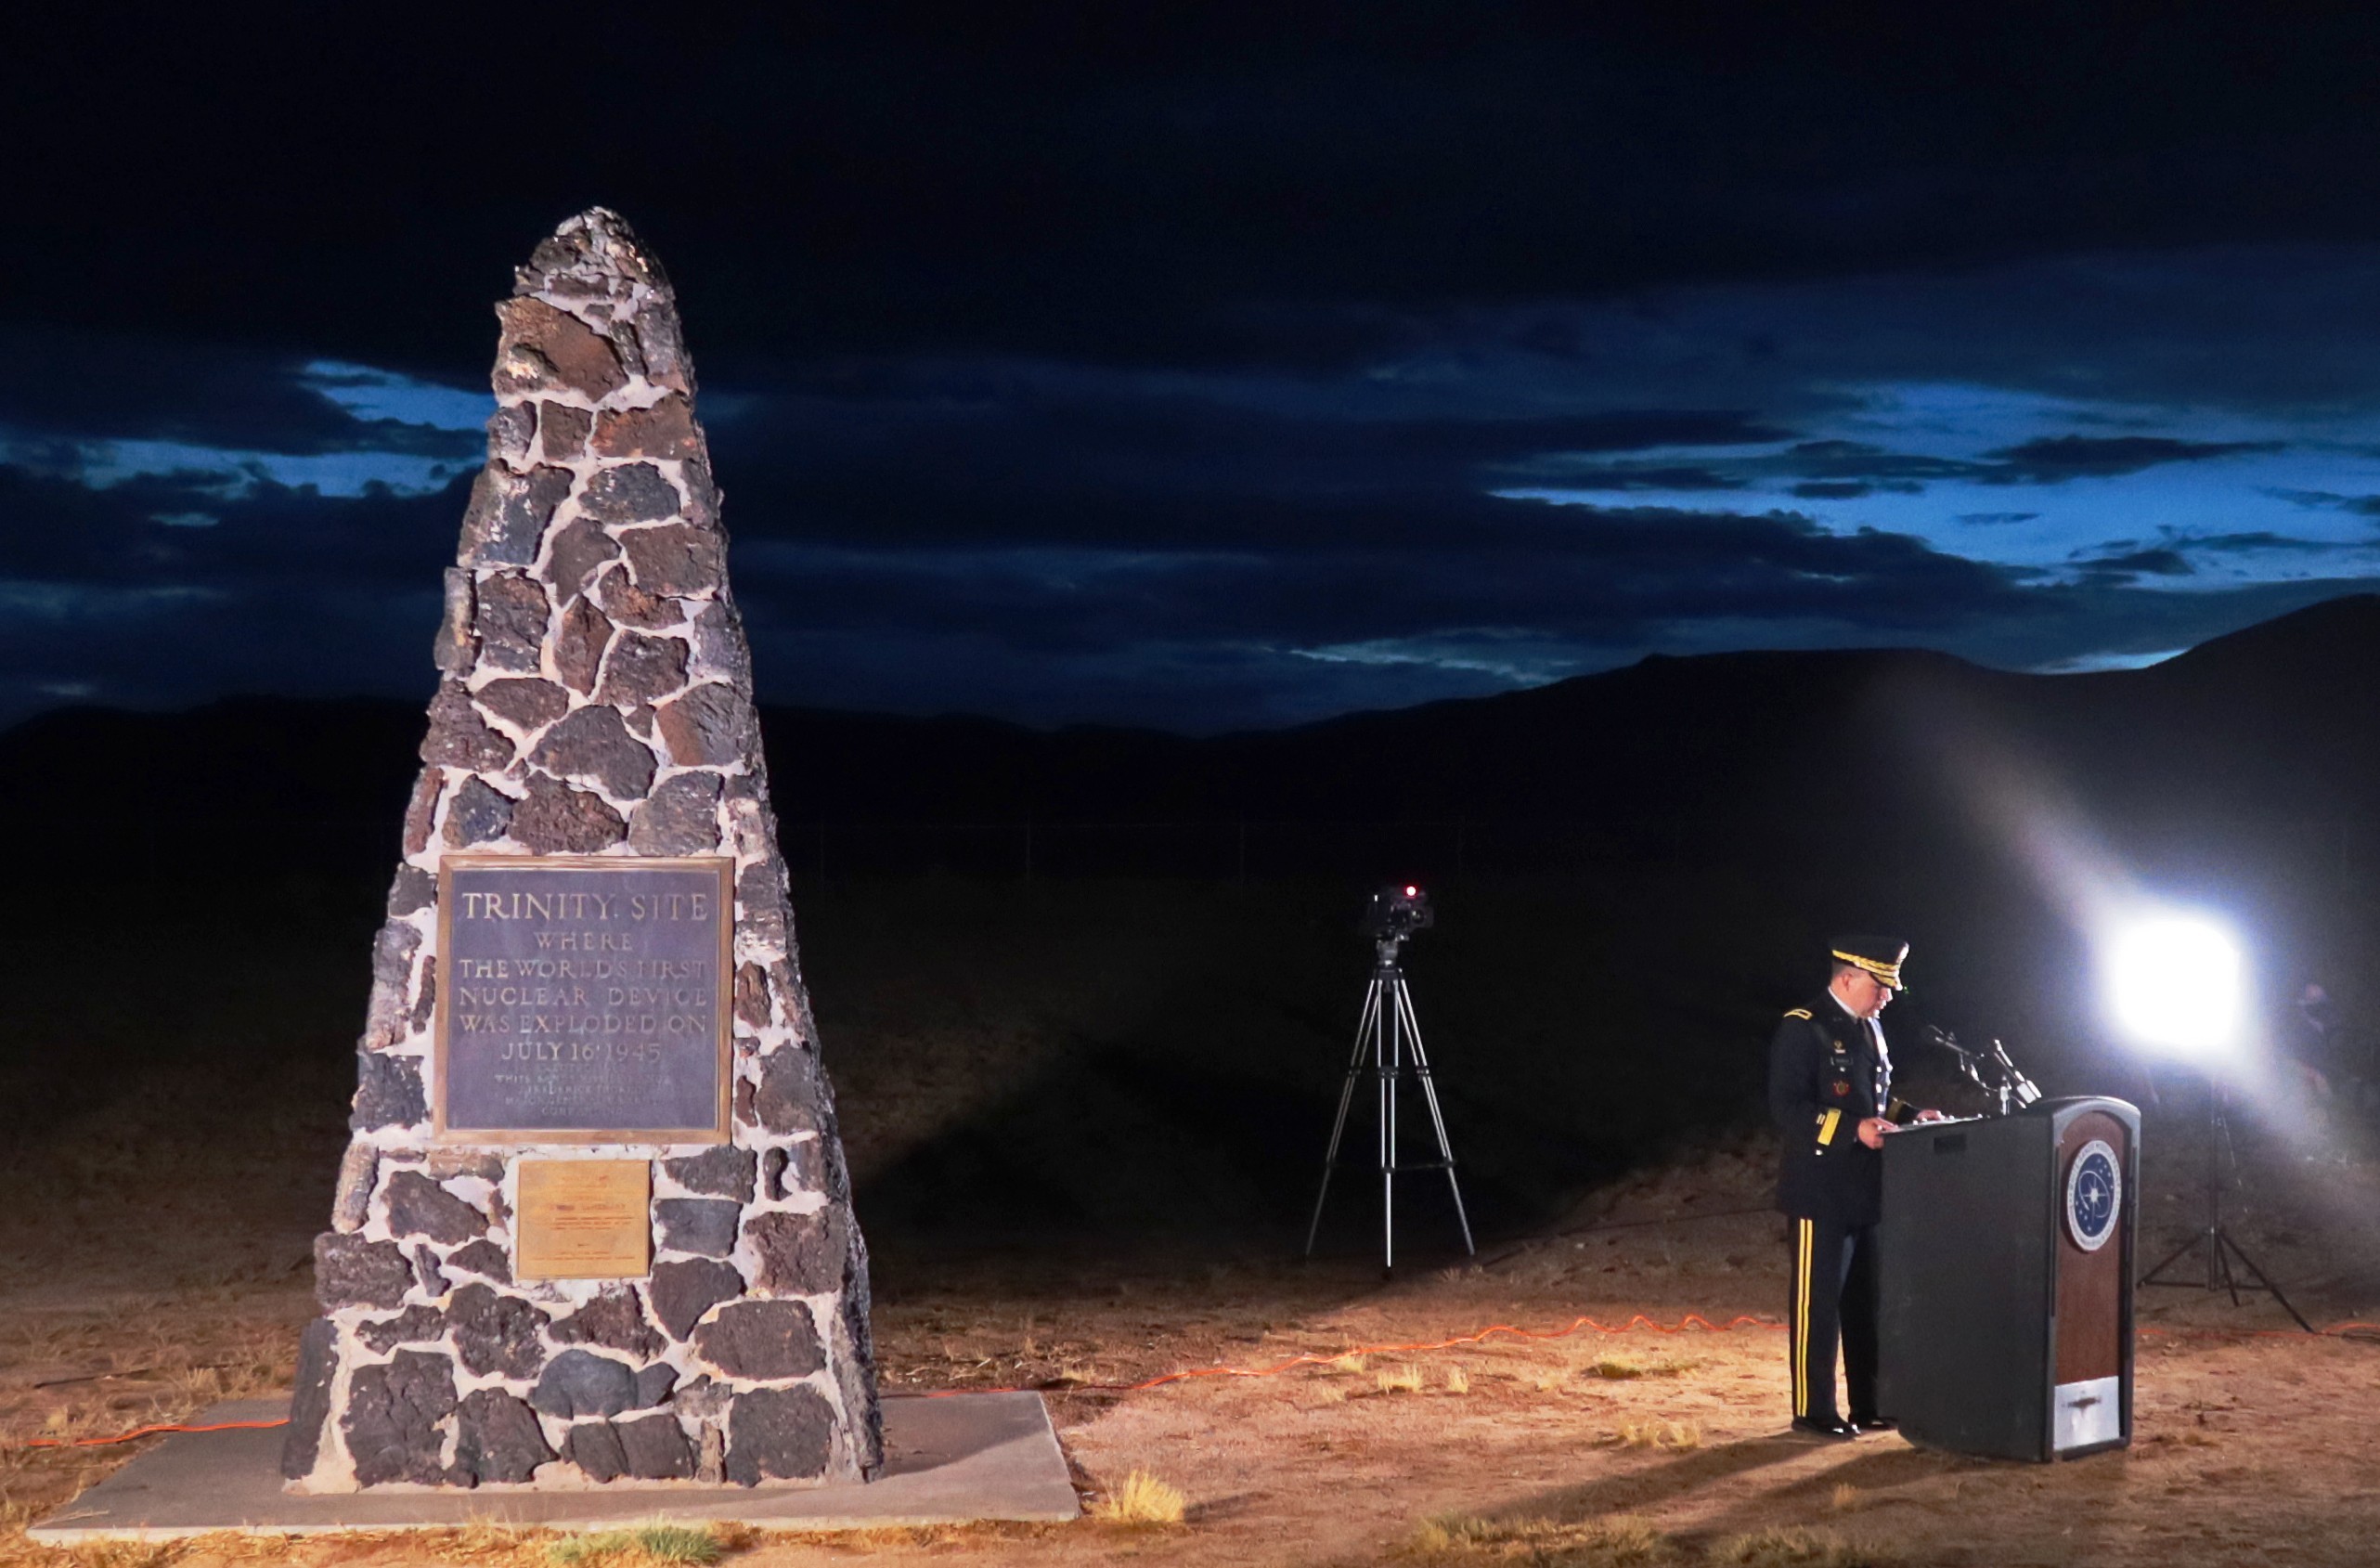 when can you visit the trinity site